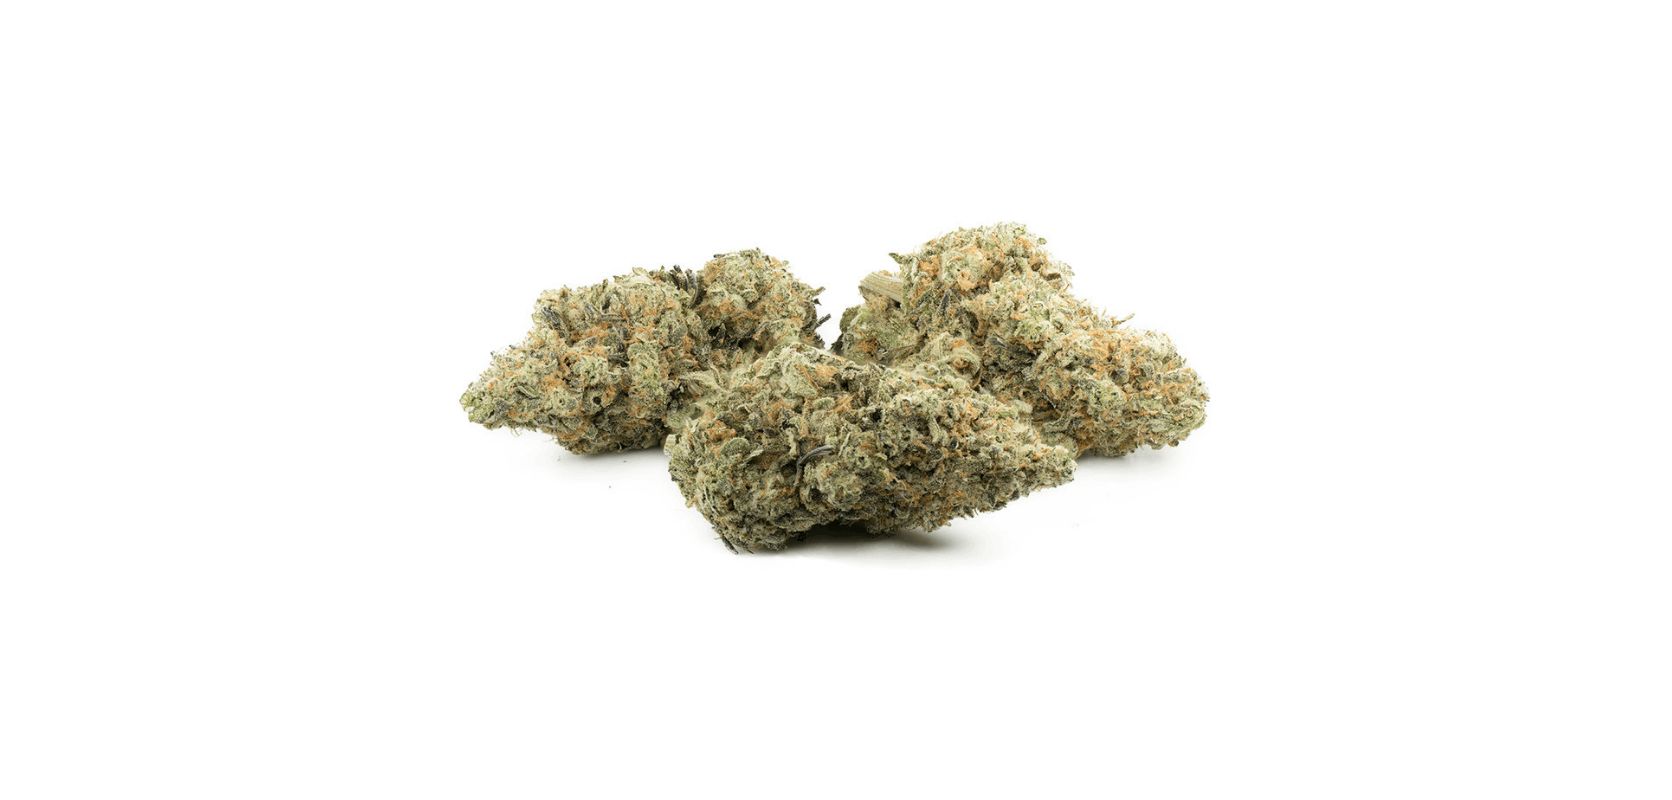 Similar to the Blueberry Kush strain, the high delivered by Ghost Train Haze is known to be powerful and long-lasting, taking you on a captivating journey that lasts for hours. 